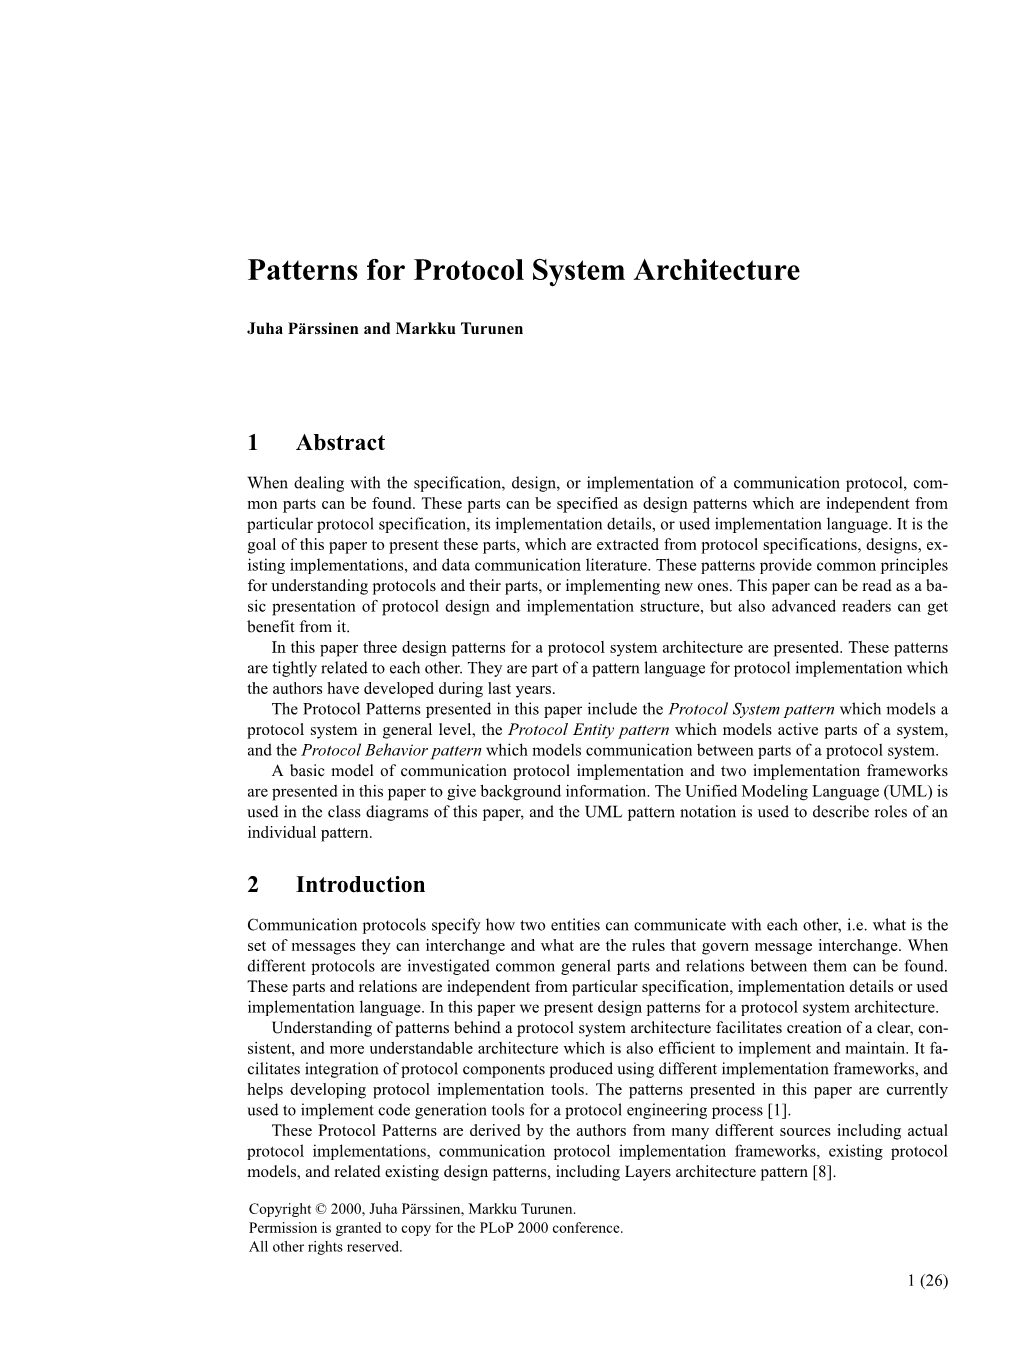 Patterns for Protocol System Architecture" on Page 9 Contains Actual Patterns